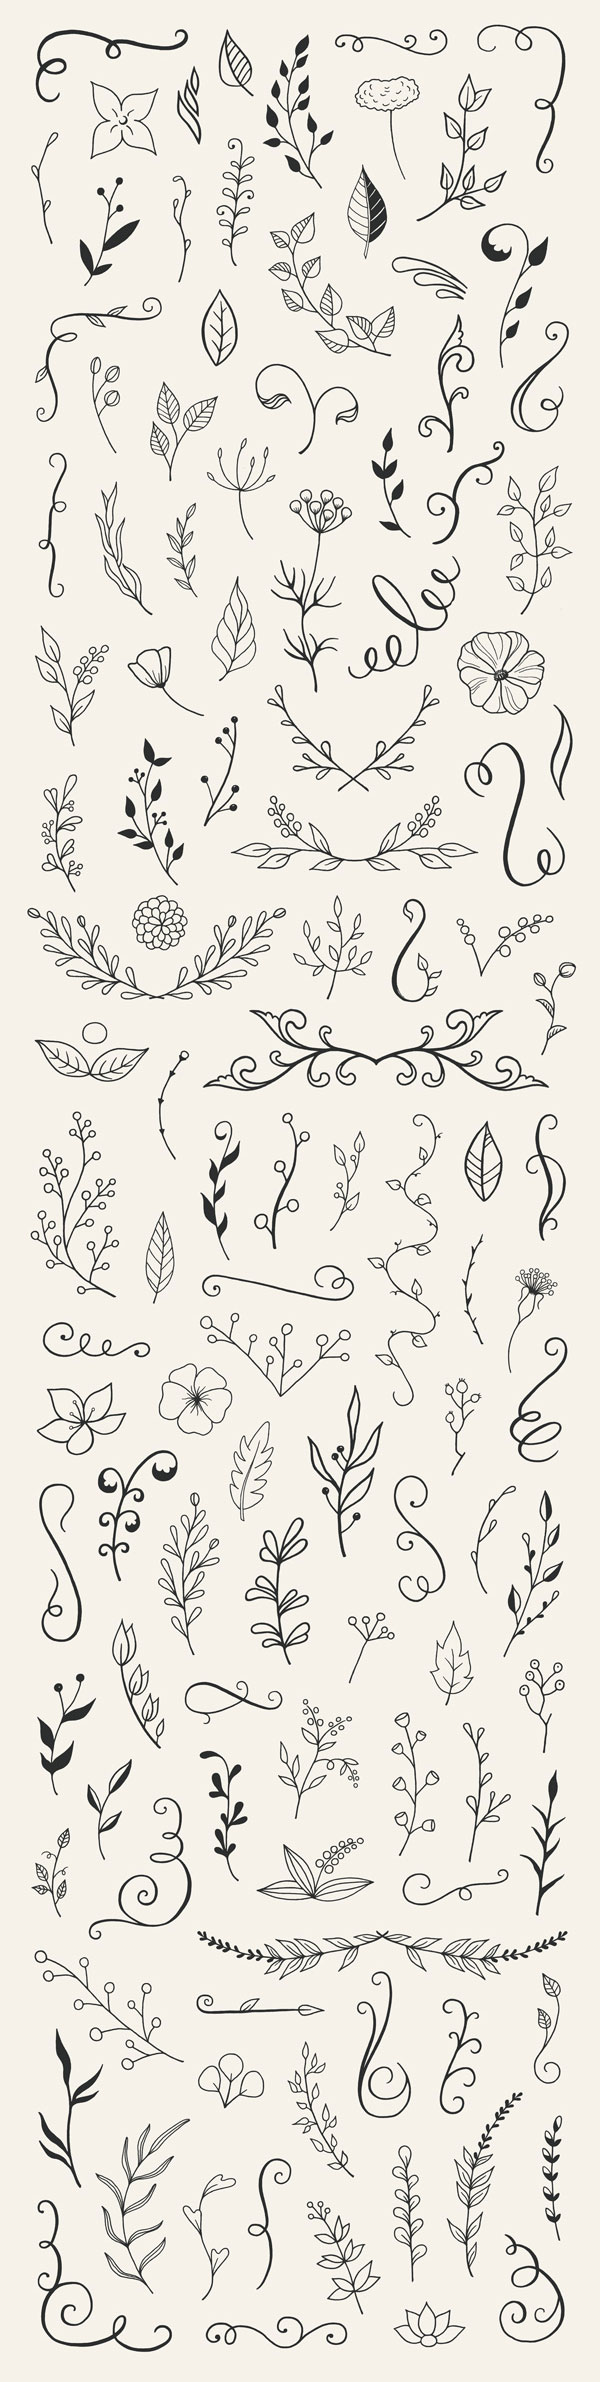 110-Hand-Drawn-Floral-Elements